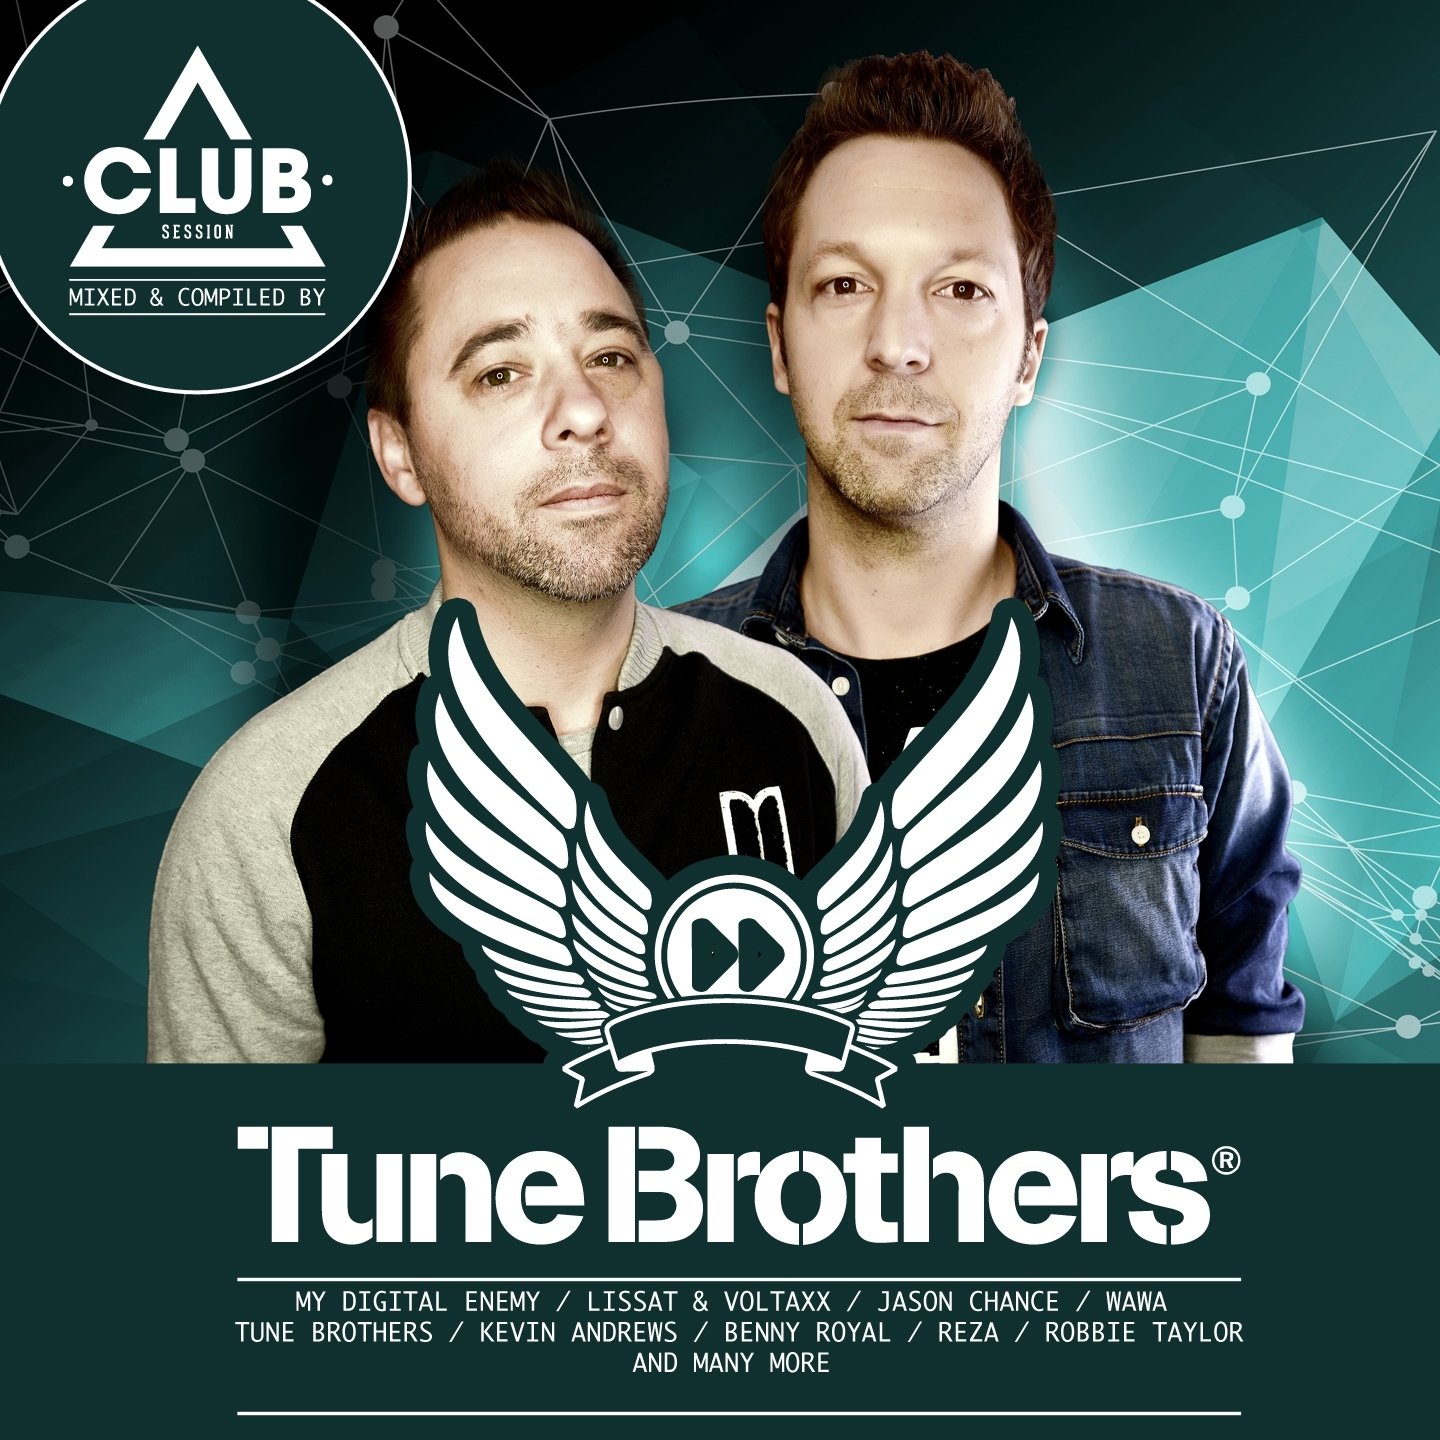 Tune brothers. Brothers Club. Brothers Tuning. Lissat & Voltaxx. Brothers Club House.